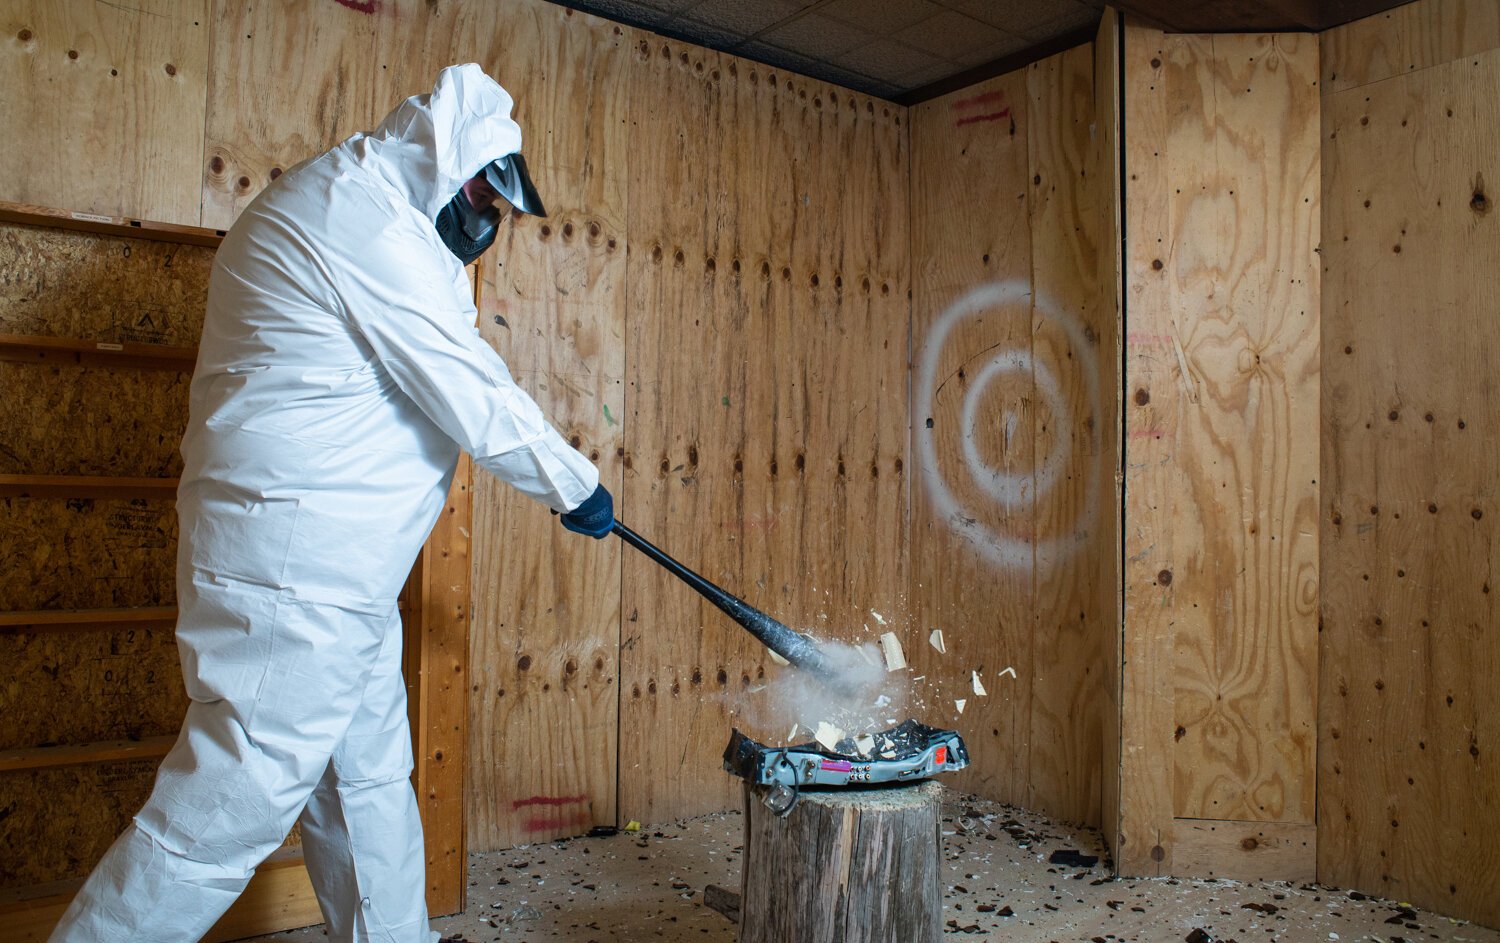 Customer Scott Zent smashes an object in his rage room.